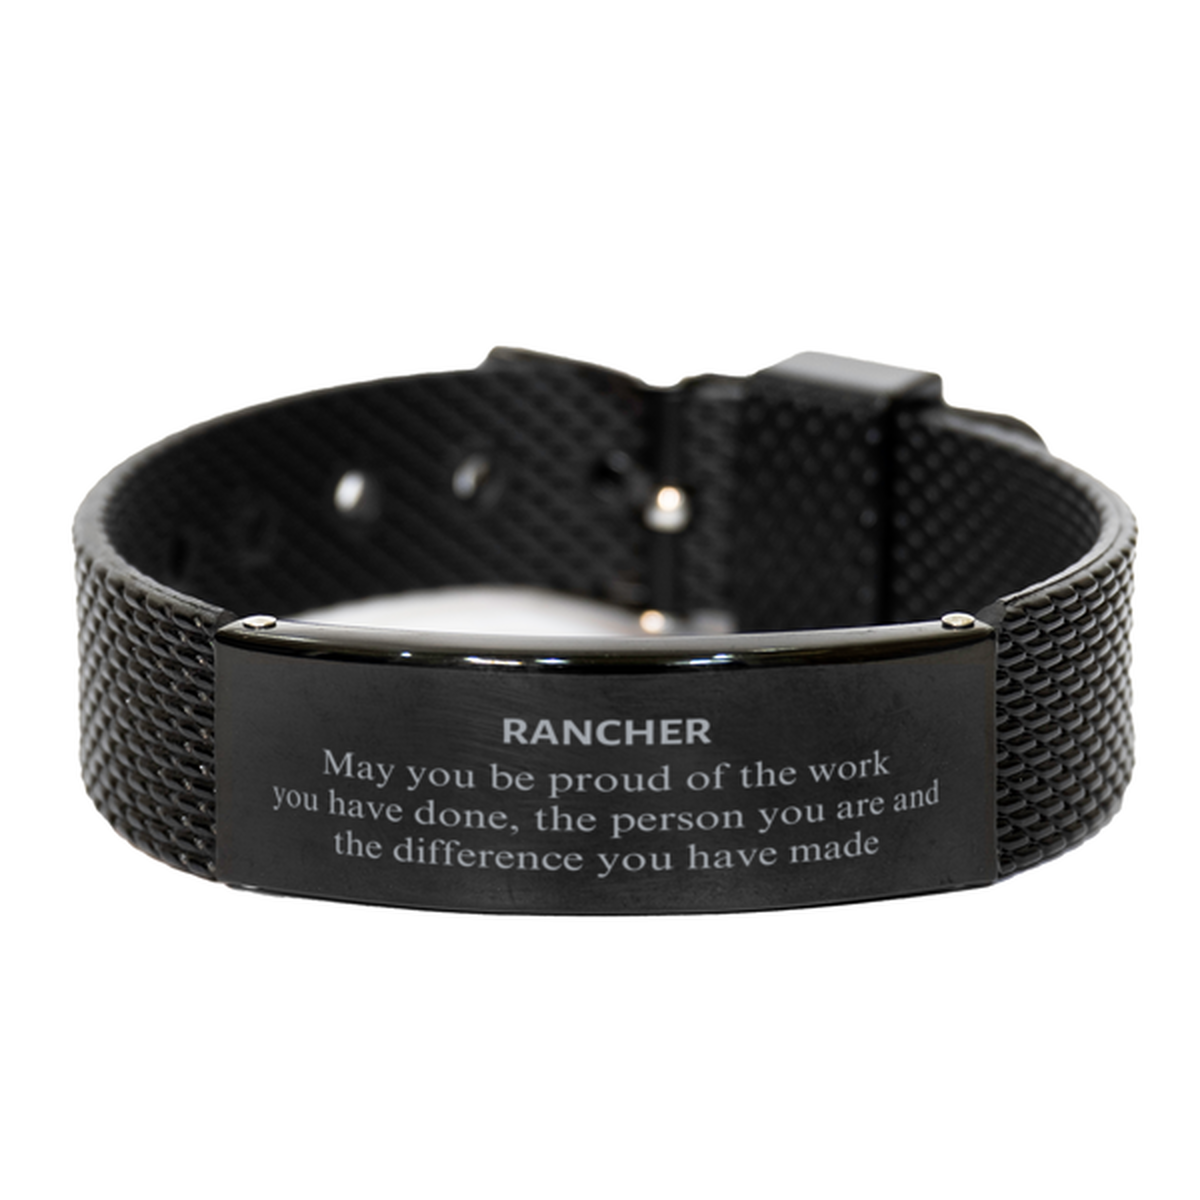 Rancher May you be proud of the work you have done, Retirement Rancher Black Shark Mesh Bracelet for Colleague Appreciation Gifts Amazing for Rancher